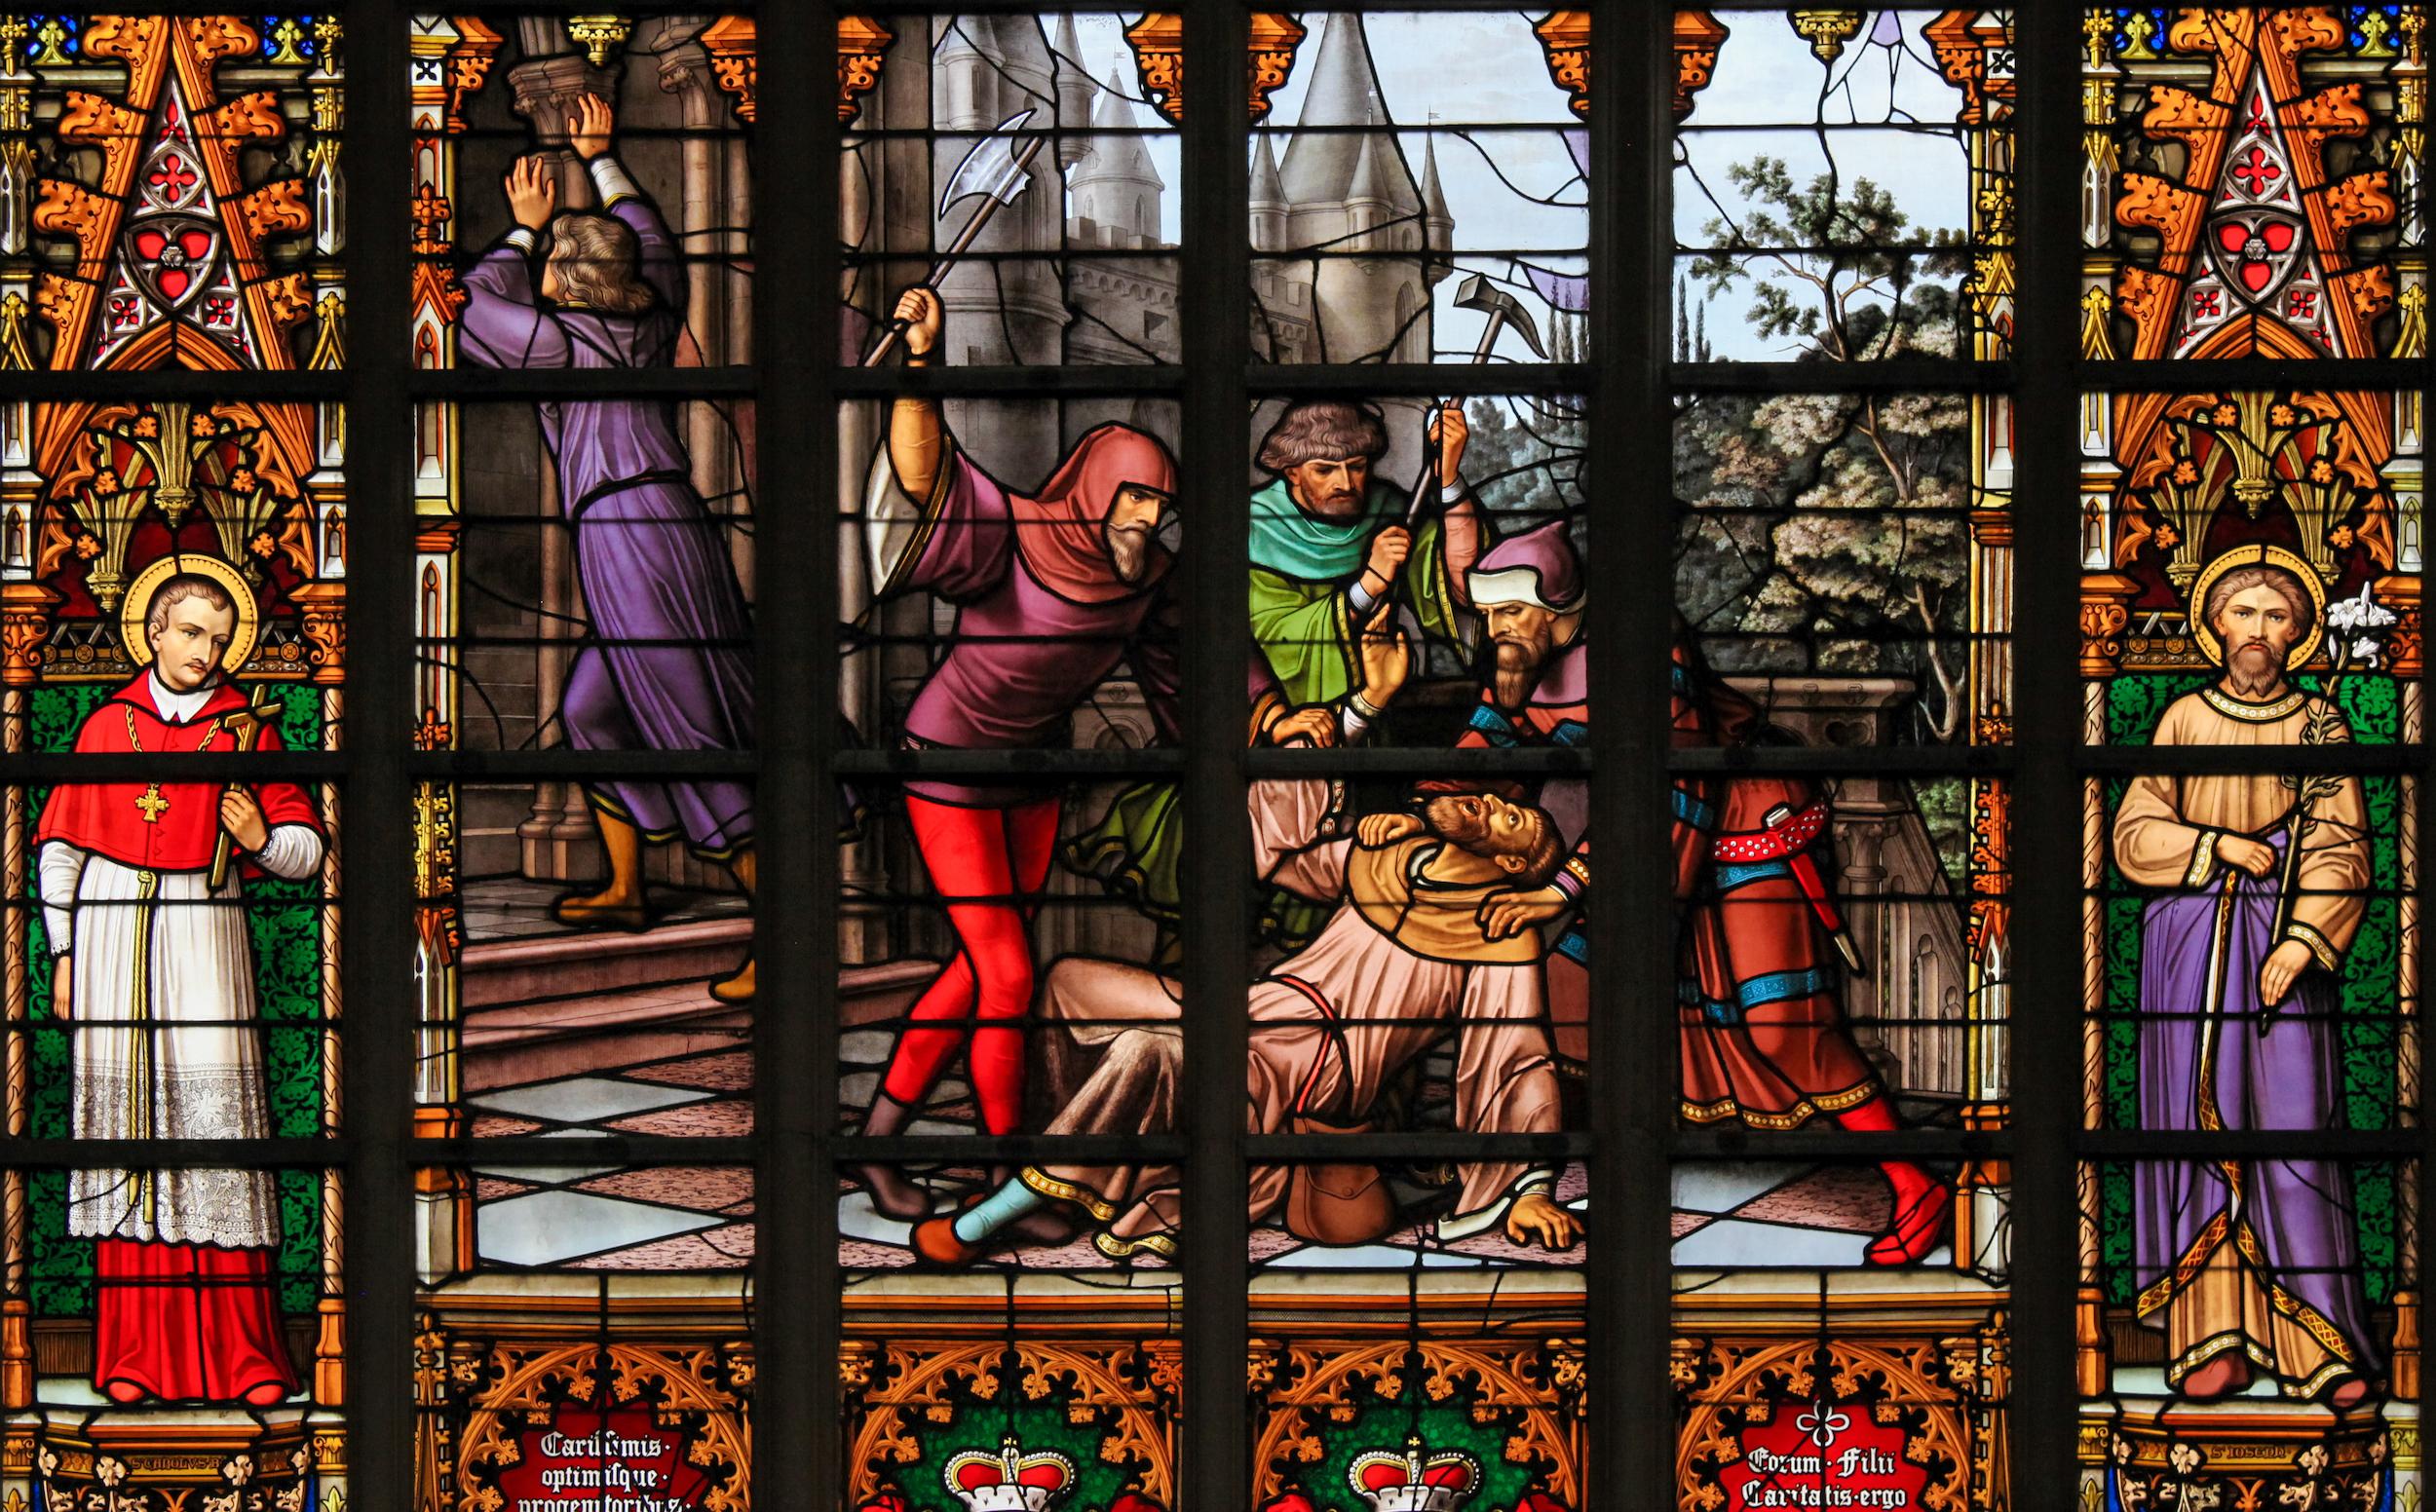 Stained glass depicting the legend of Jews stealing sacramental bread, in the Cathedral of Brussels